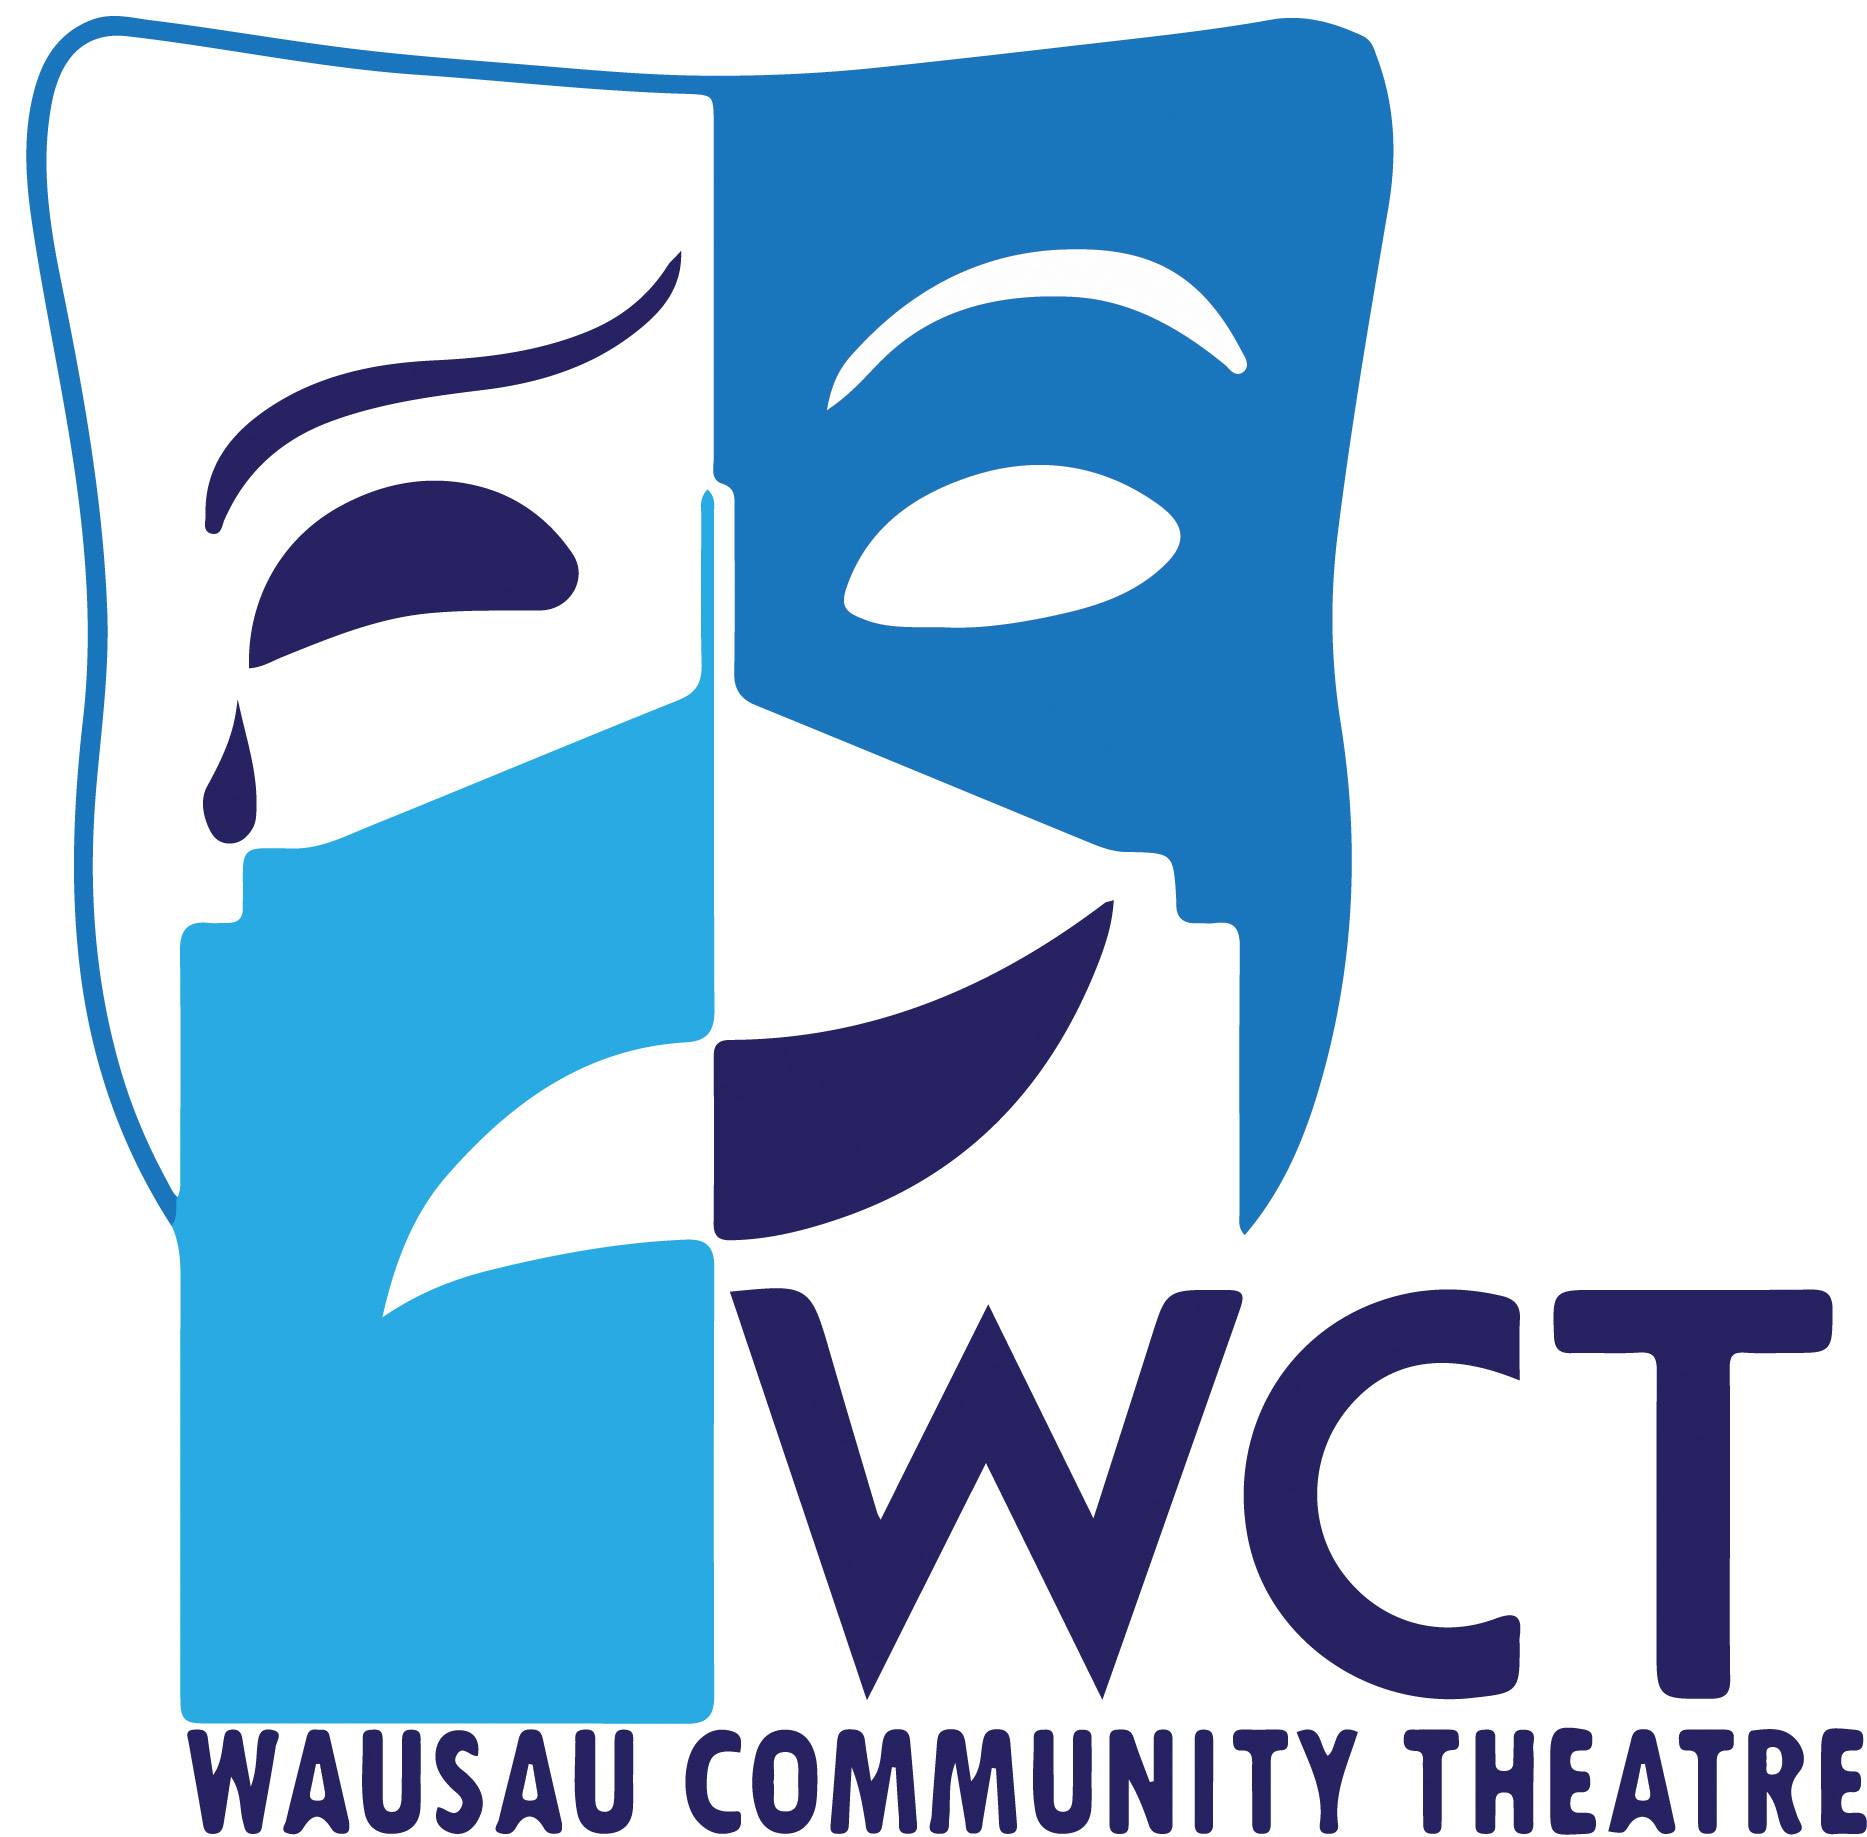 Wausau Community Theatre’s financial struggles may mean the final show